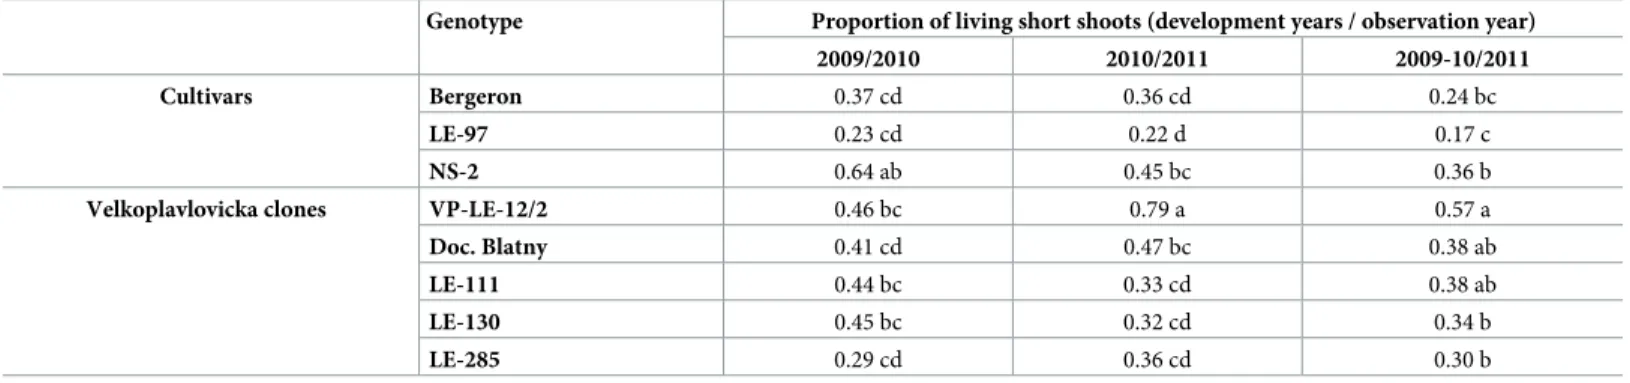 Table 6. Proportion of short shoots developed in 2009 and 2010 still alive along the branch axis in 2010 (2009/2010) and 2011 (2010/2011), respectively